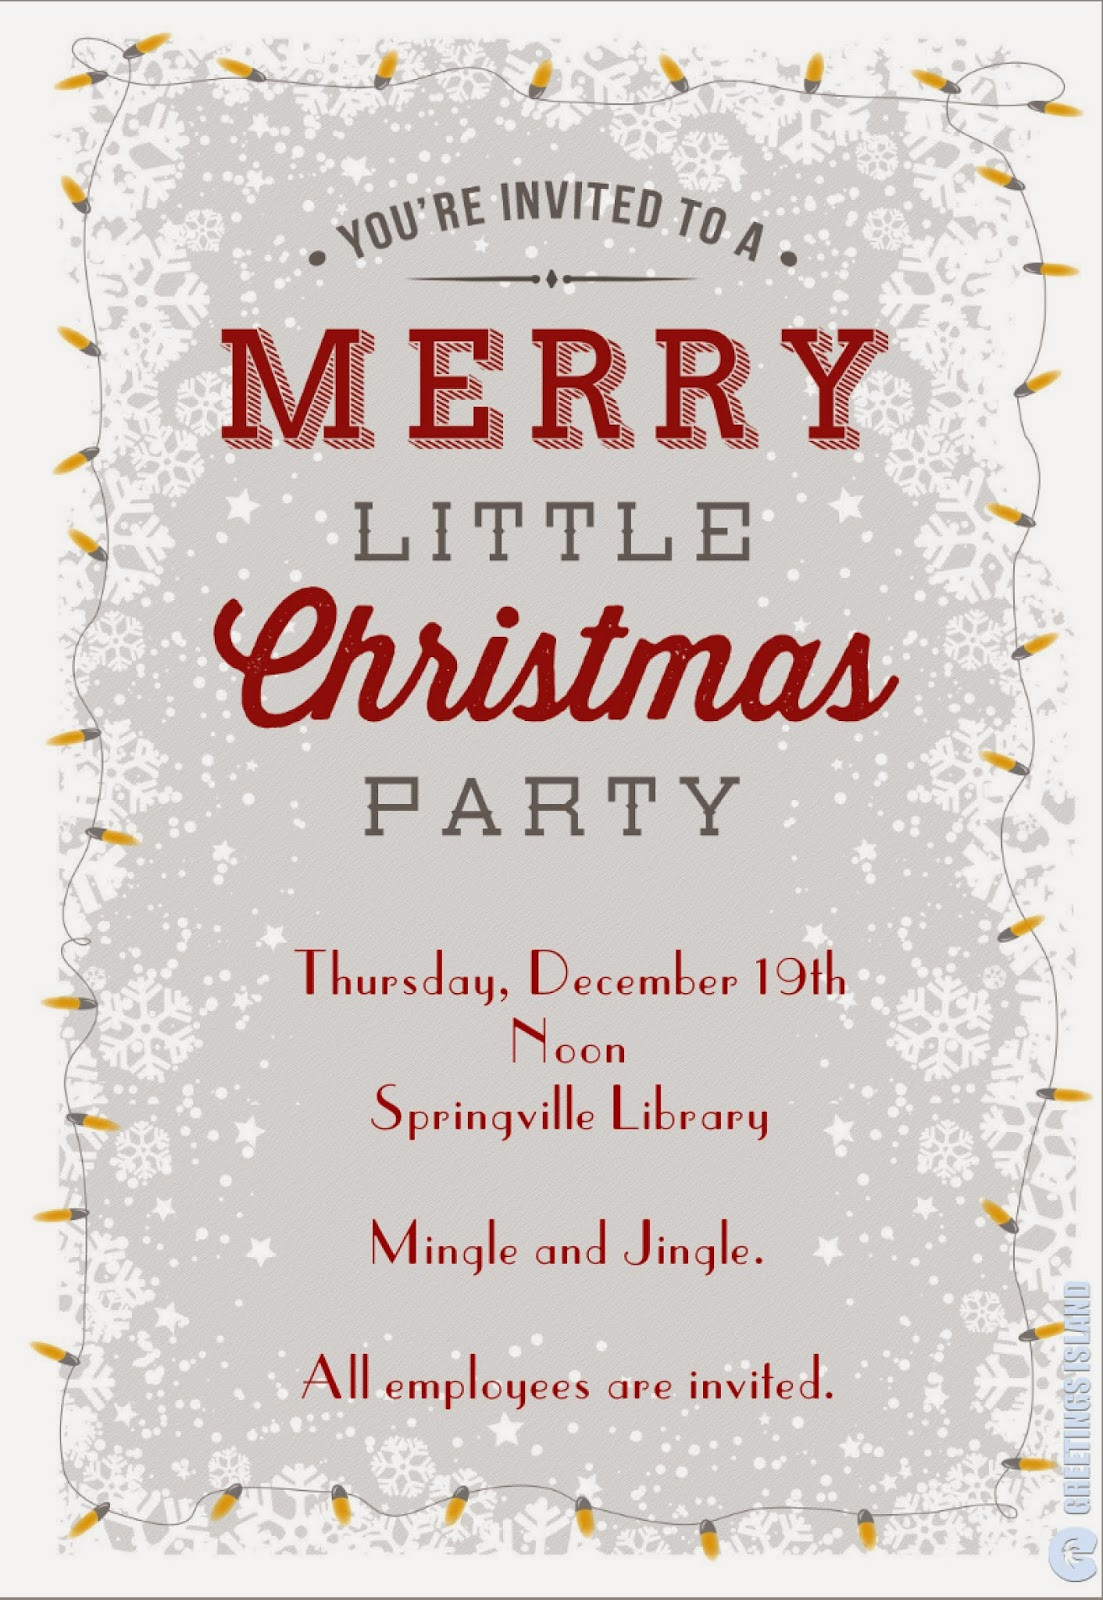 Employee Holiday Party Ideas
 Springville City Employee News Employee Christmas Party